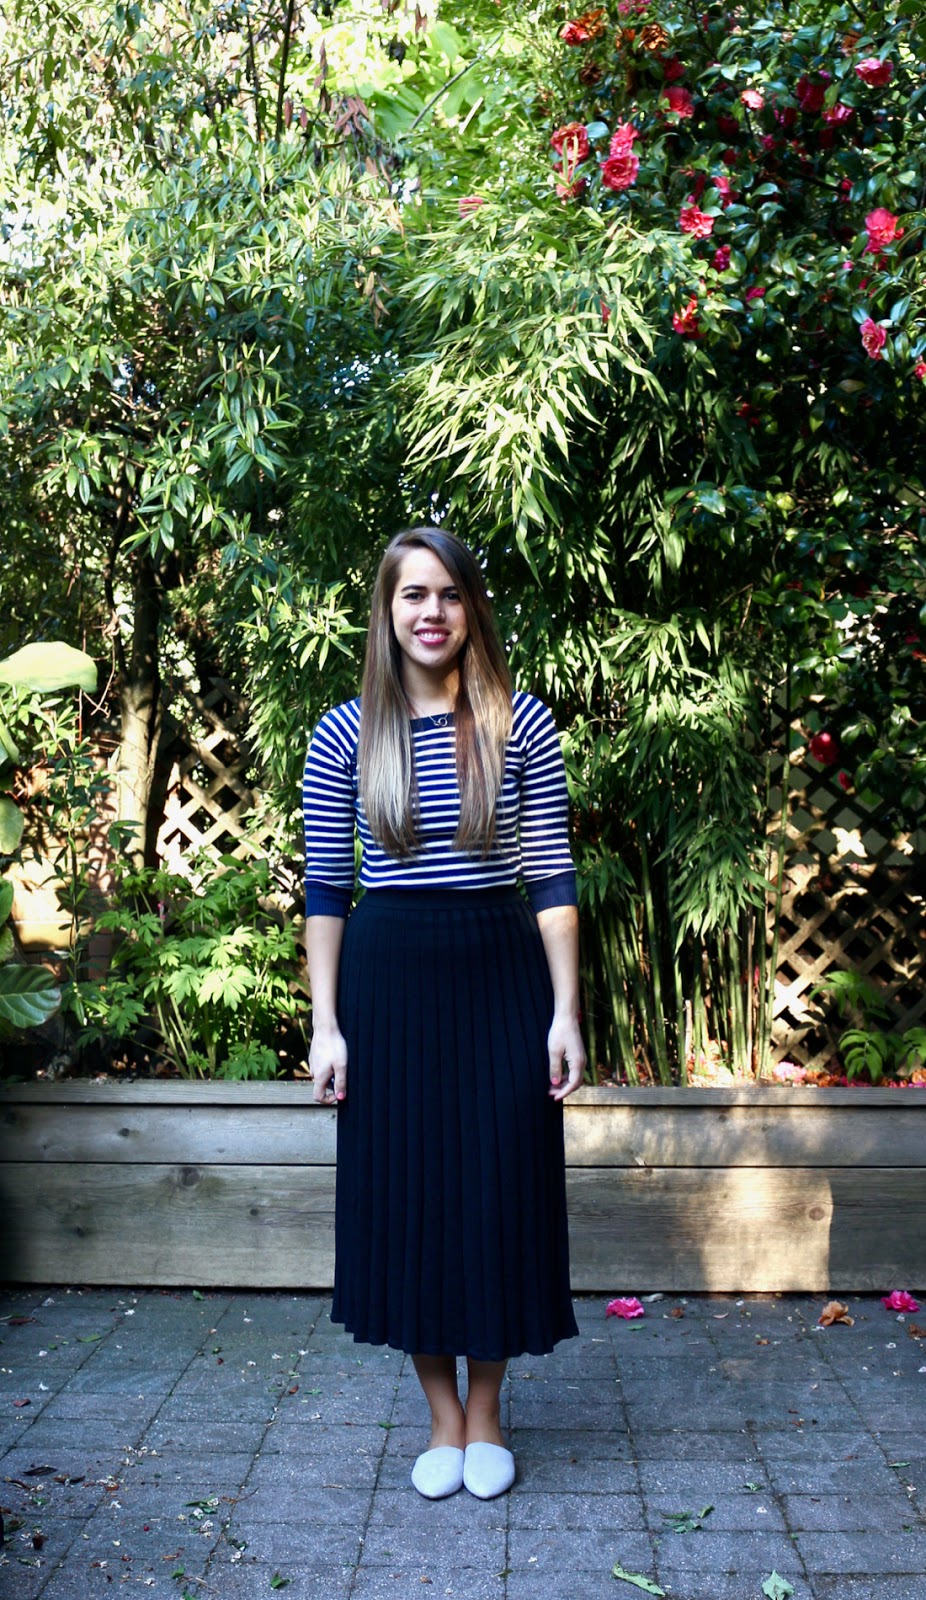 Jules in Flats - Striped Sweater and Knit Midi Skirt (Business Casual Spring Workwear on a Budget)